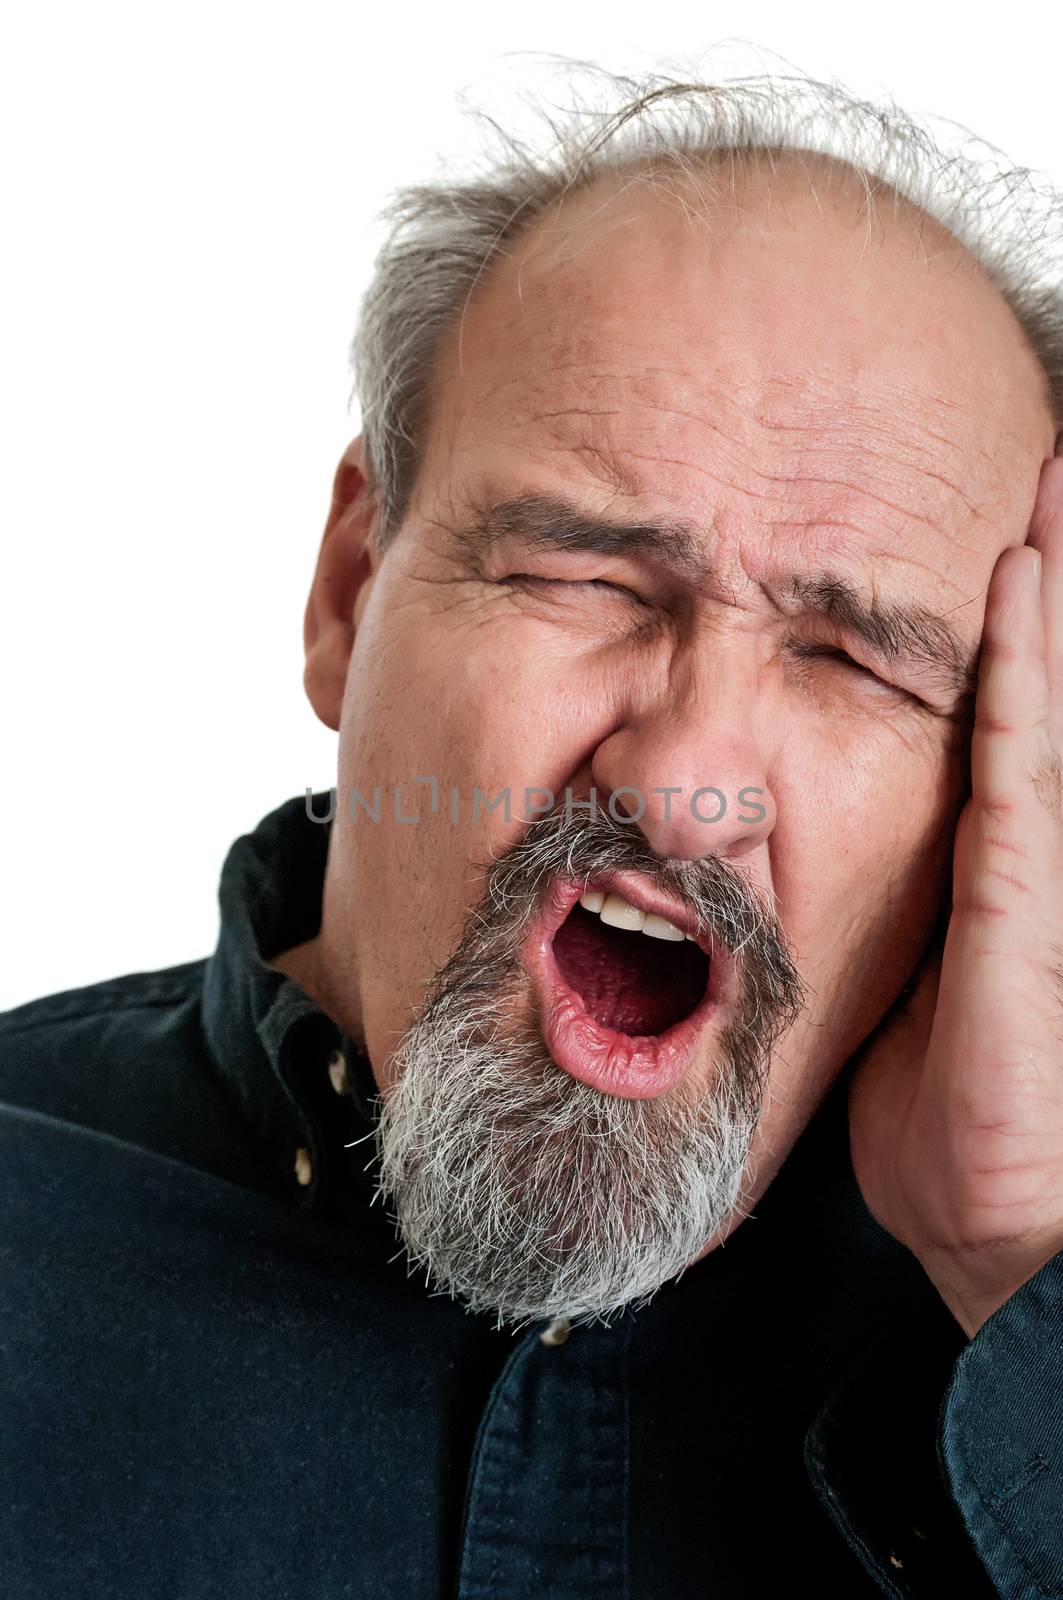 Balding man in his sixties holding his head in pain as he shouts. Isolated on a white background.